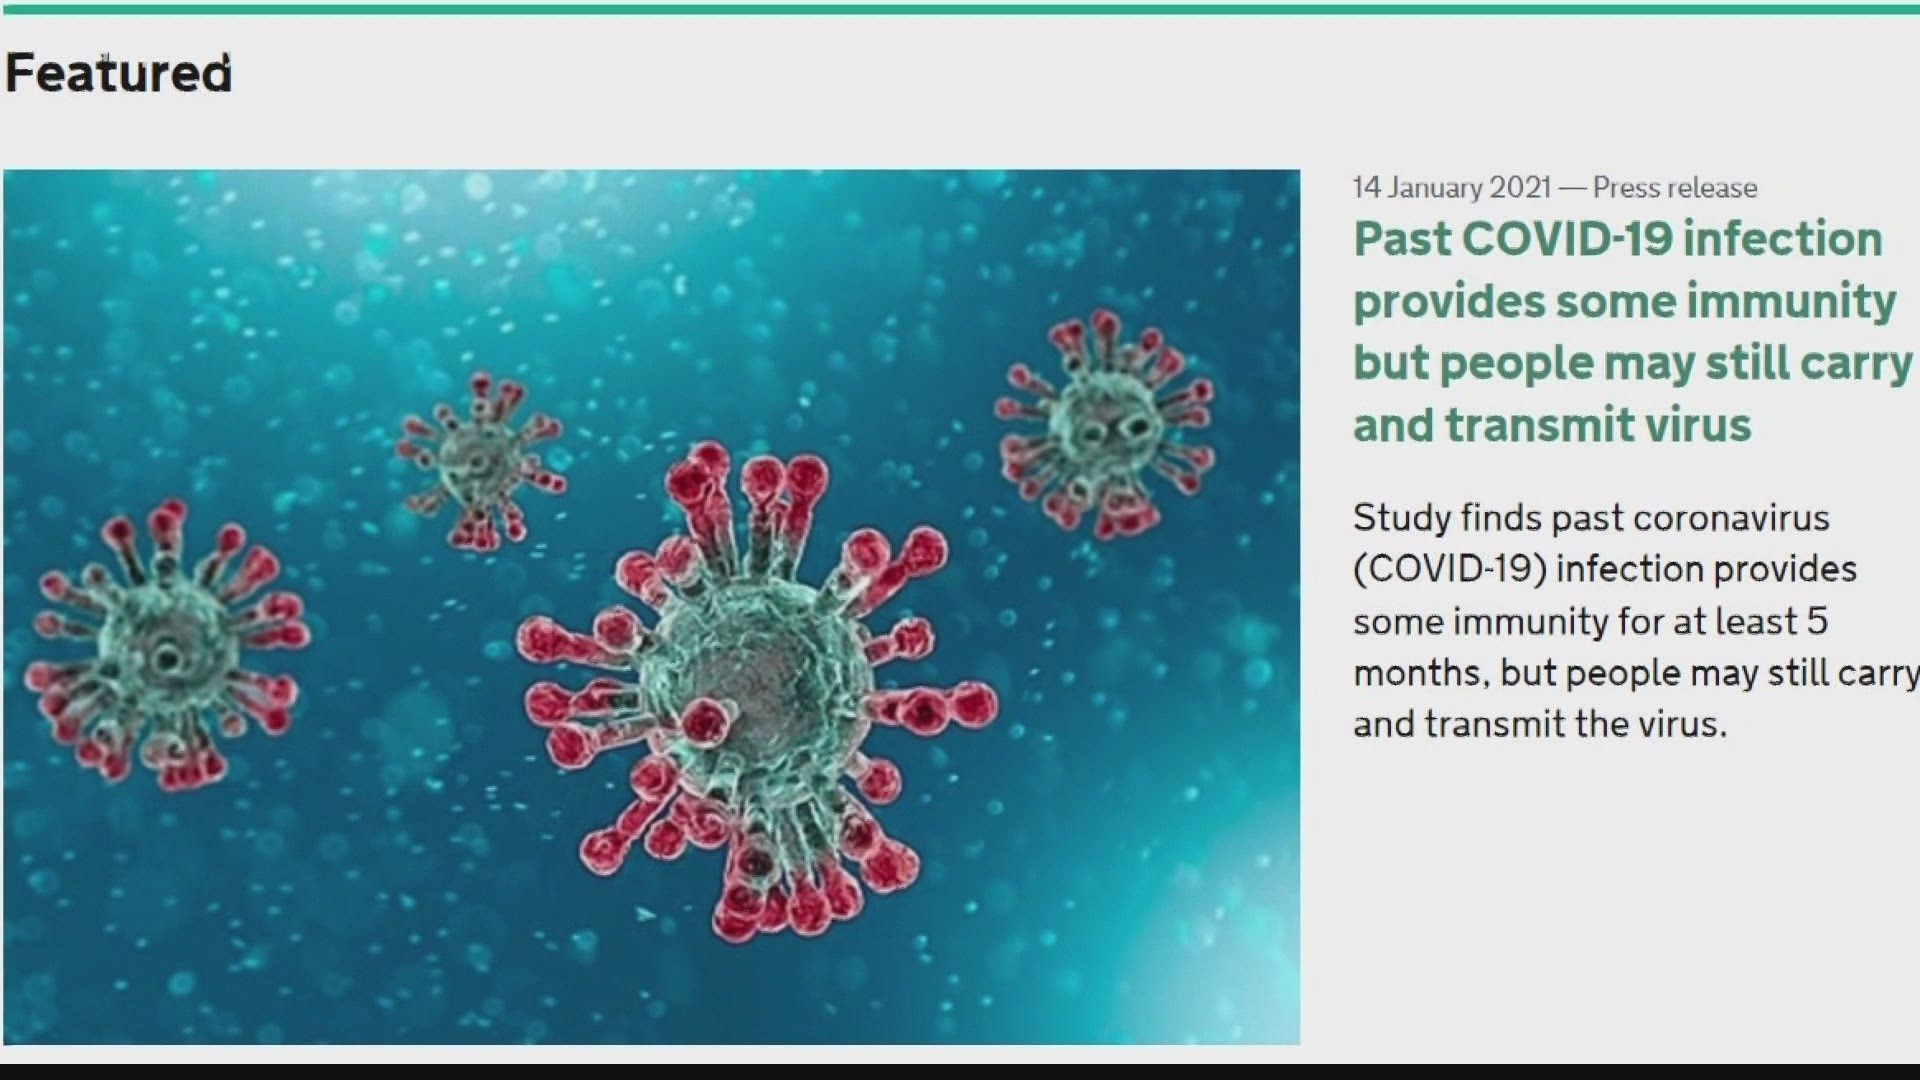 The study warns those with immunity from previous infections can still pass the virus to others.